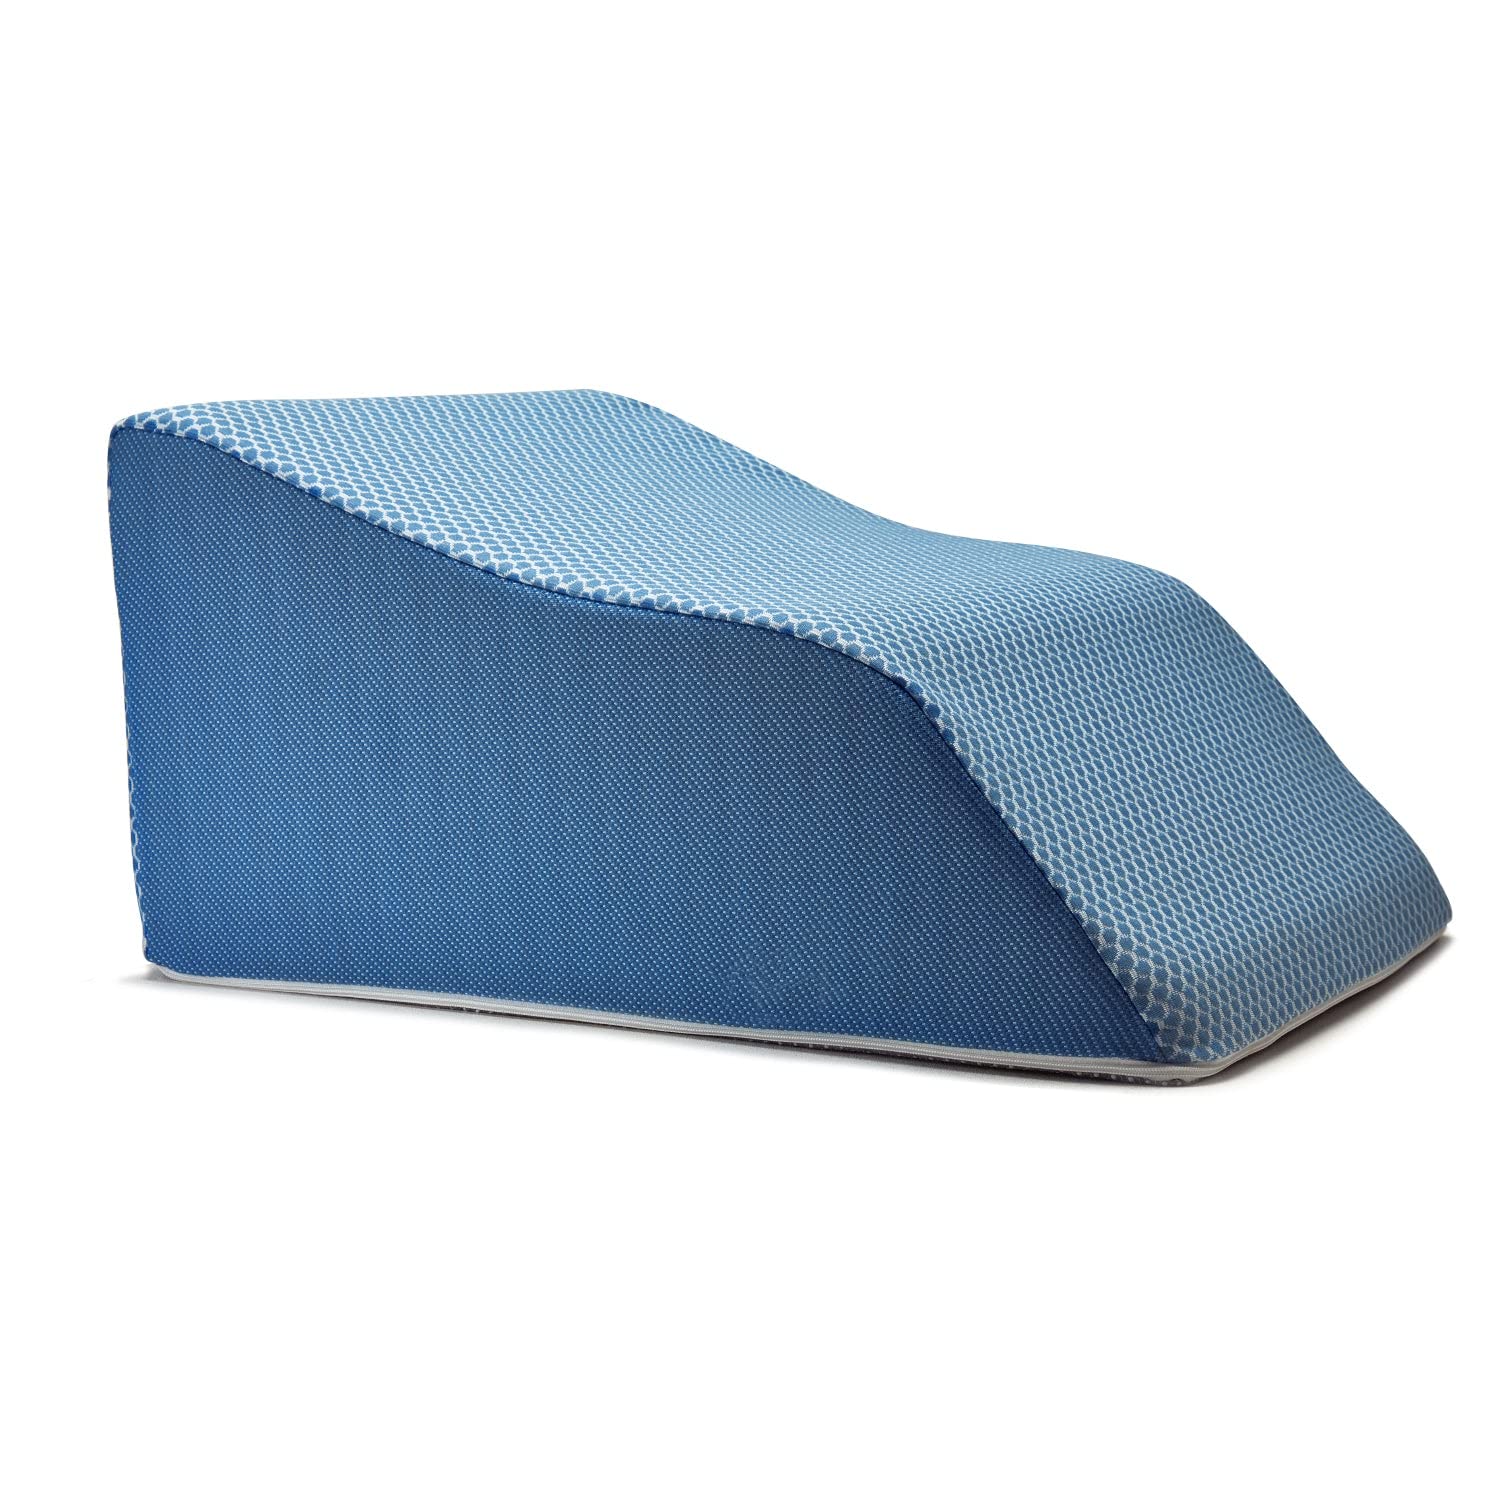 Lounge Doctor Elevating Leg Rest Pillow, Tall, 18 in. Wide, Heather Grey, Uniquely Designed Incline Wedge for Vein Circulation, Leg Swelling, Lymphedema, Leg and Back Pain, Relaxation